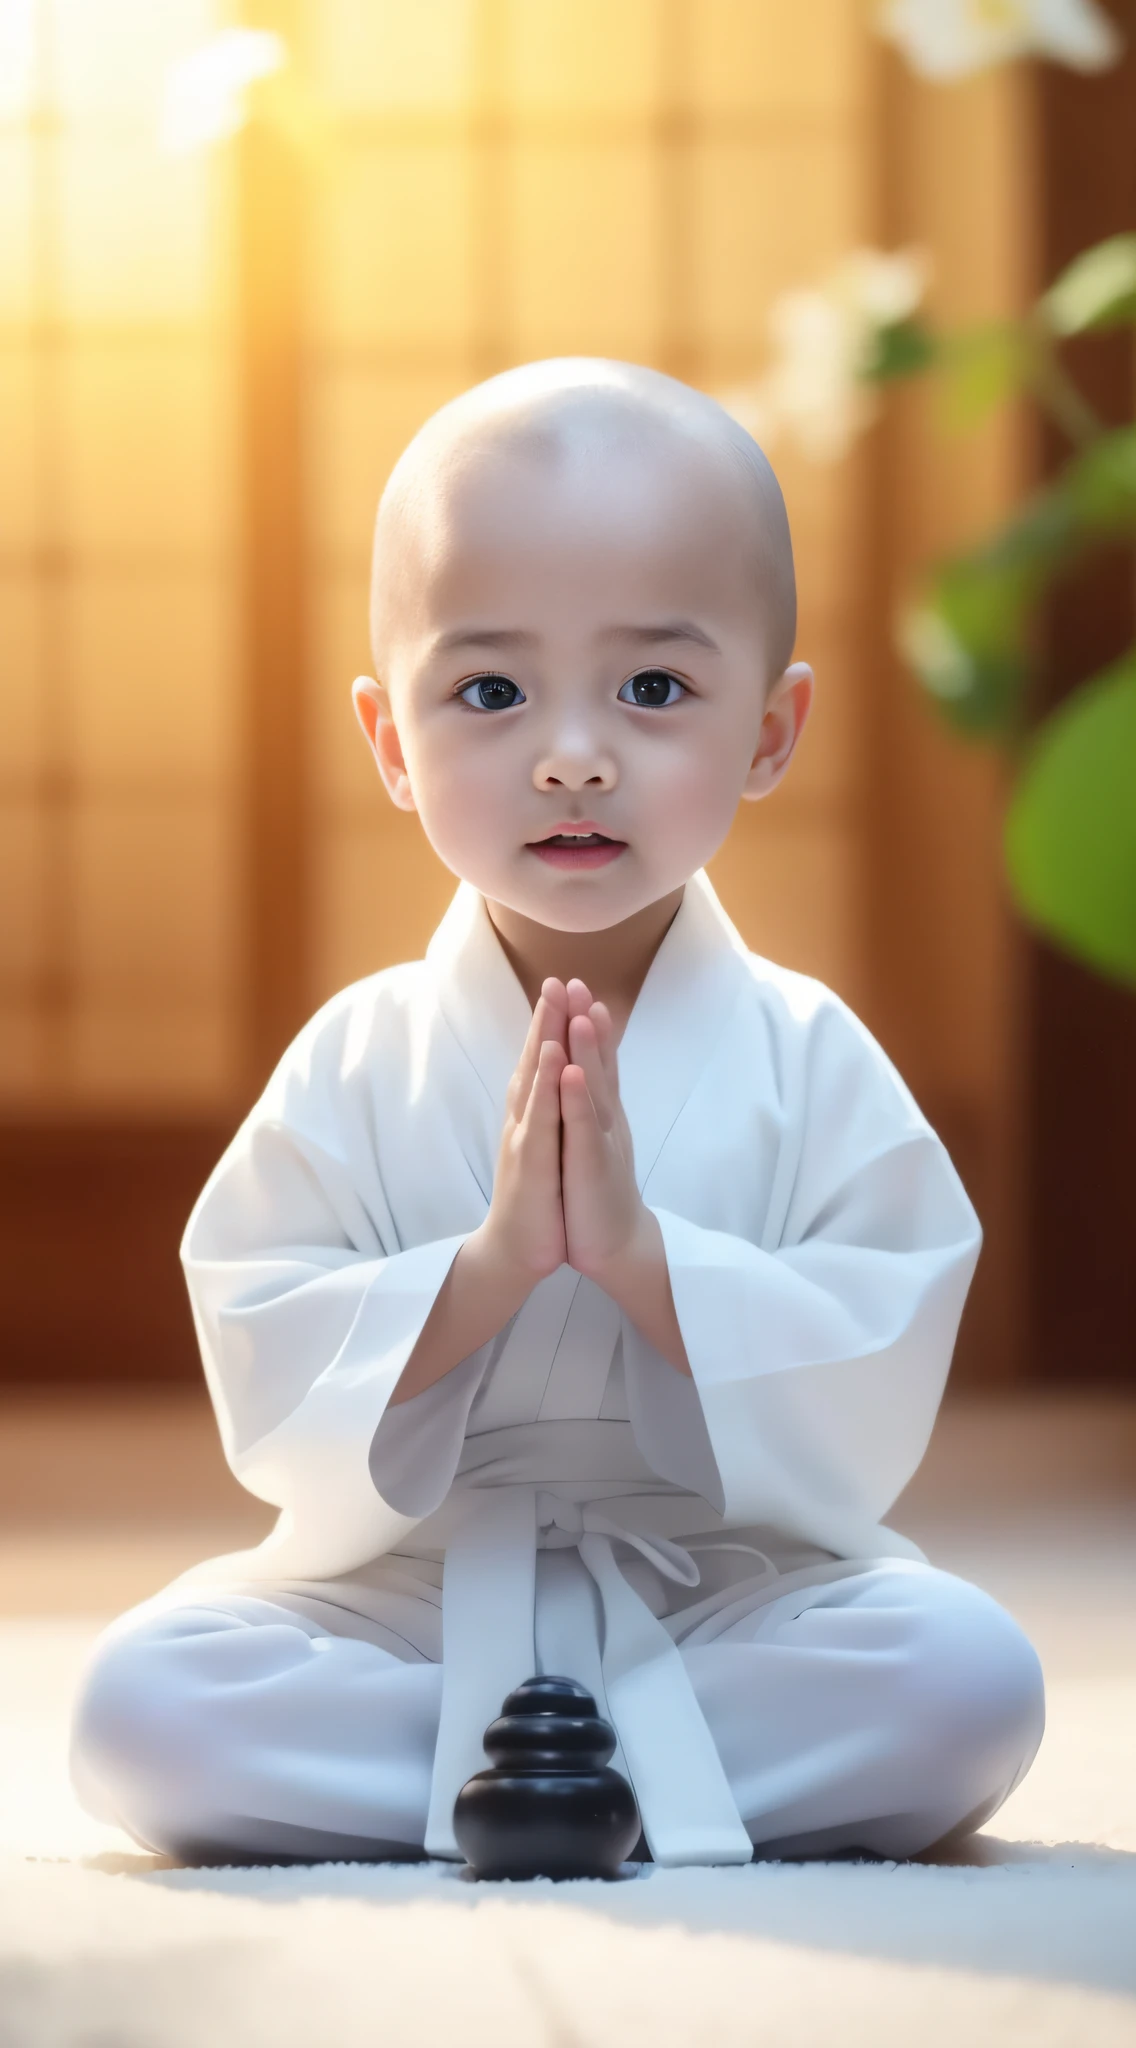 Close-up of a  sitting on the ground in a white robe, he is greeting you warmly, dressed in simple robes, peaceful expression, prayer meditation, blessing hand, little boy wearing nun outfit, peace, wearing white robes with!, very calm and wholesome, a serene smile, young wan angel, Serene expression, Buddhist, wearing white robes with, yanjun cheng，bald-headed